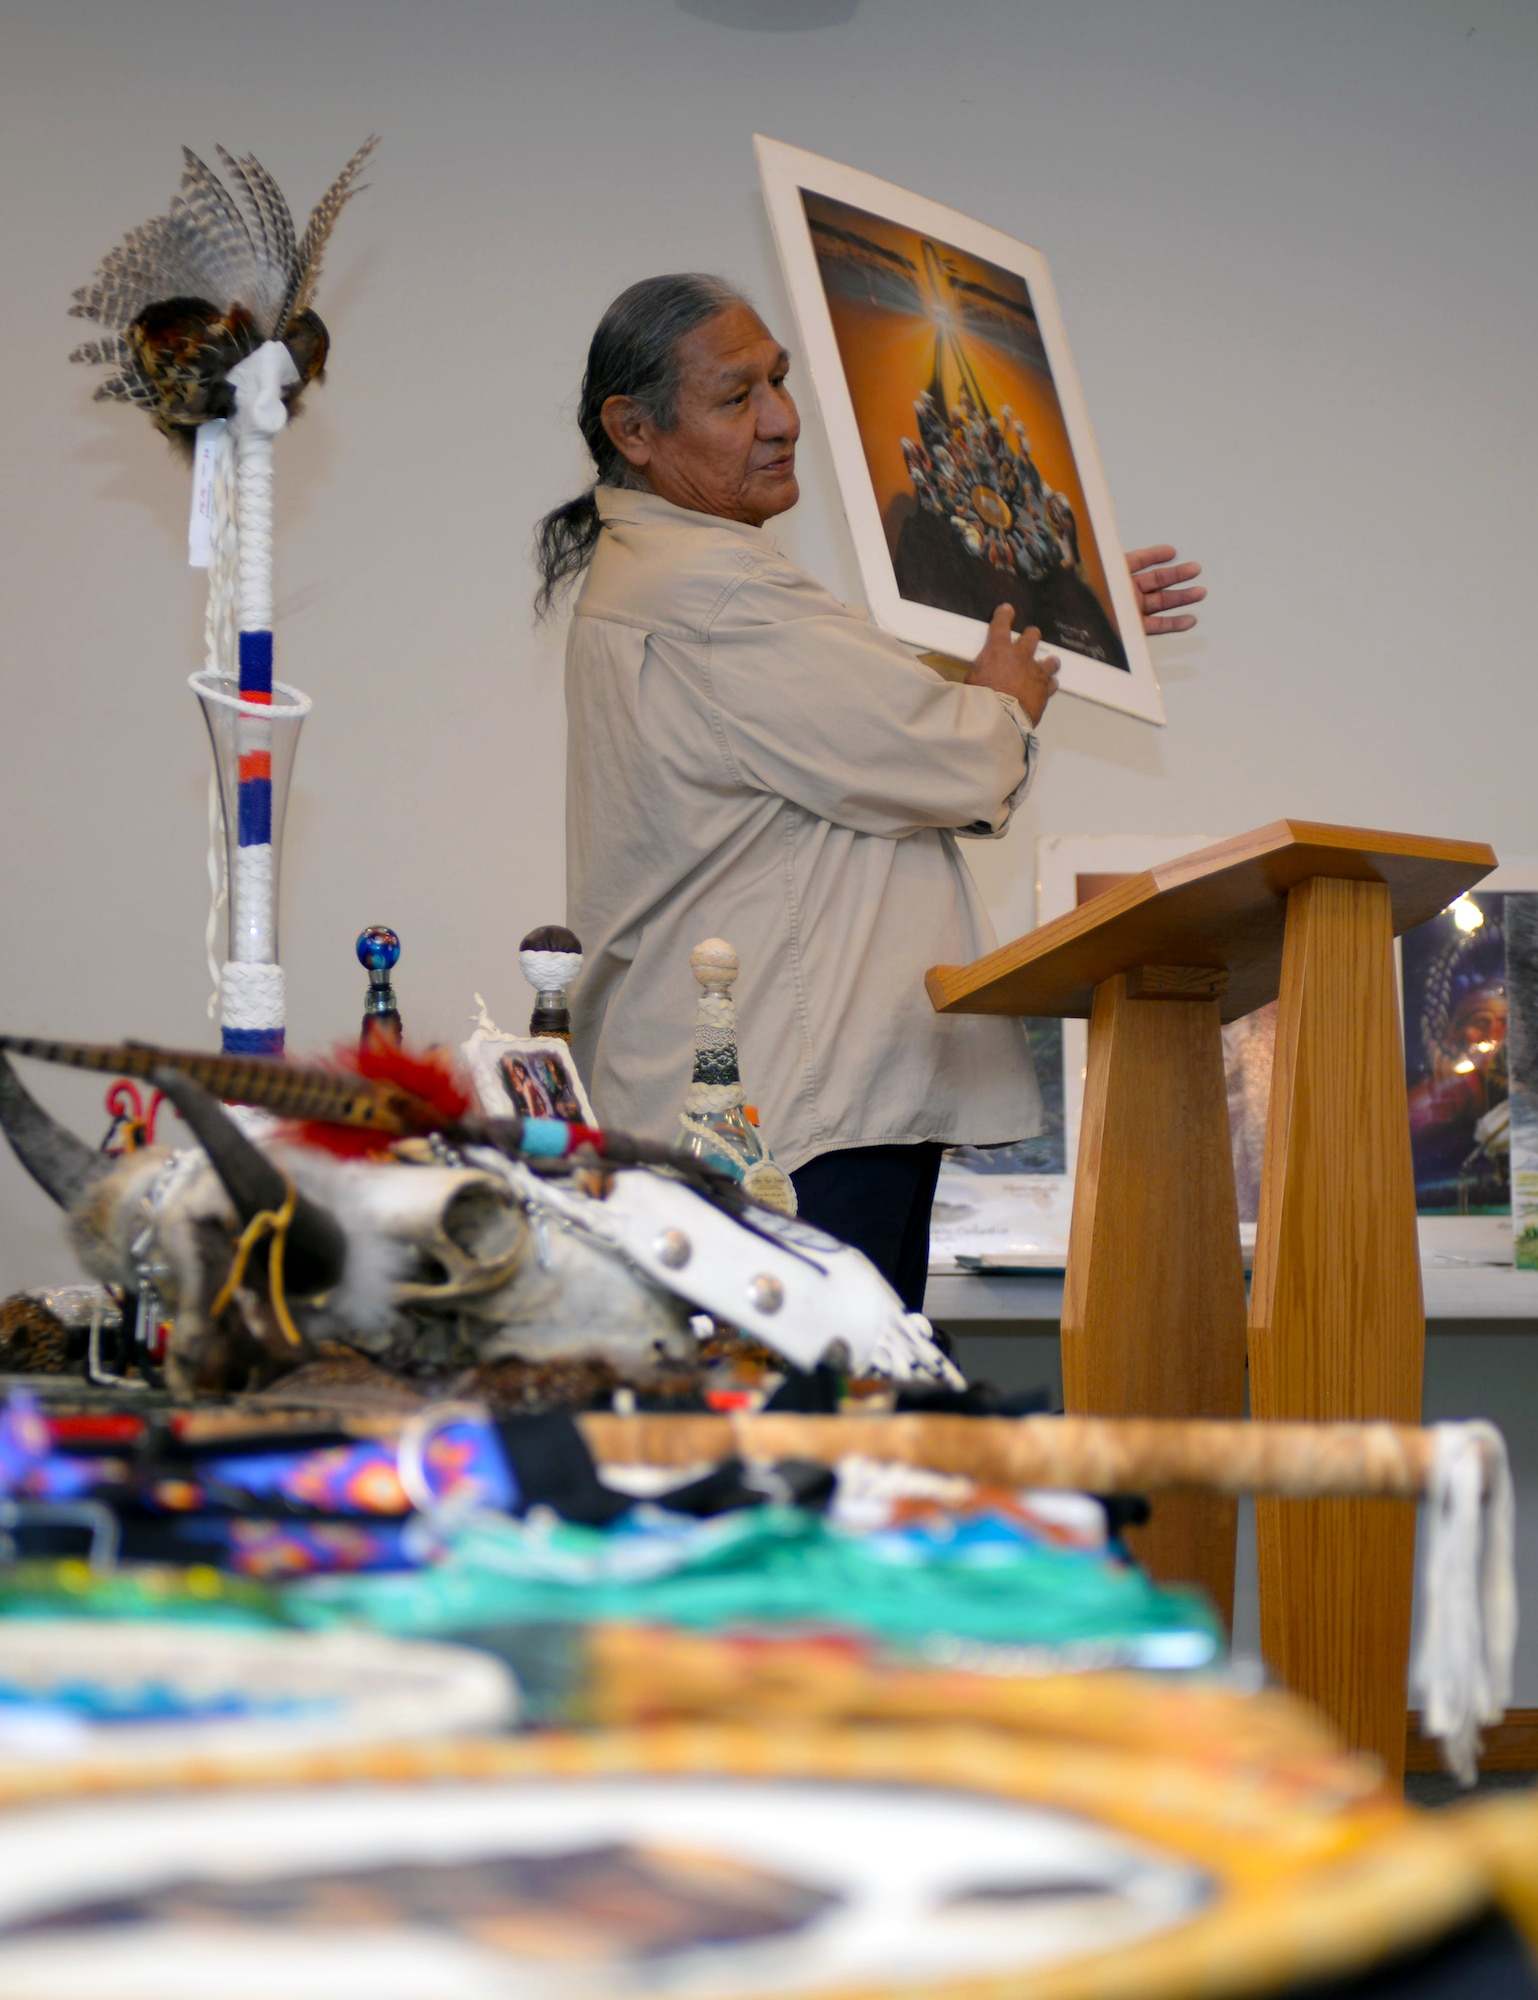 Daryl No Heart, a Lakota native storyteller, holds up a painting of a native prayer circle during a food tasting and storytelling event celebrating National Native American Heritage Month at Ellsworth Air Force Base, S.D., Nov. 10, 2016. No Heart spoke on his life experiences growing up and the importance of keeping Native American spirit and culture alive. (U.S. Air Force photo by Airman 1st Class Denise M. Jenson)